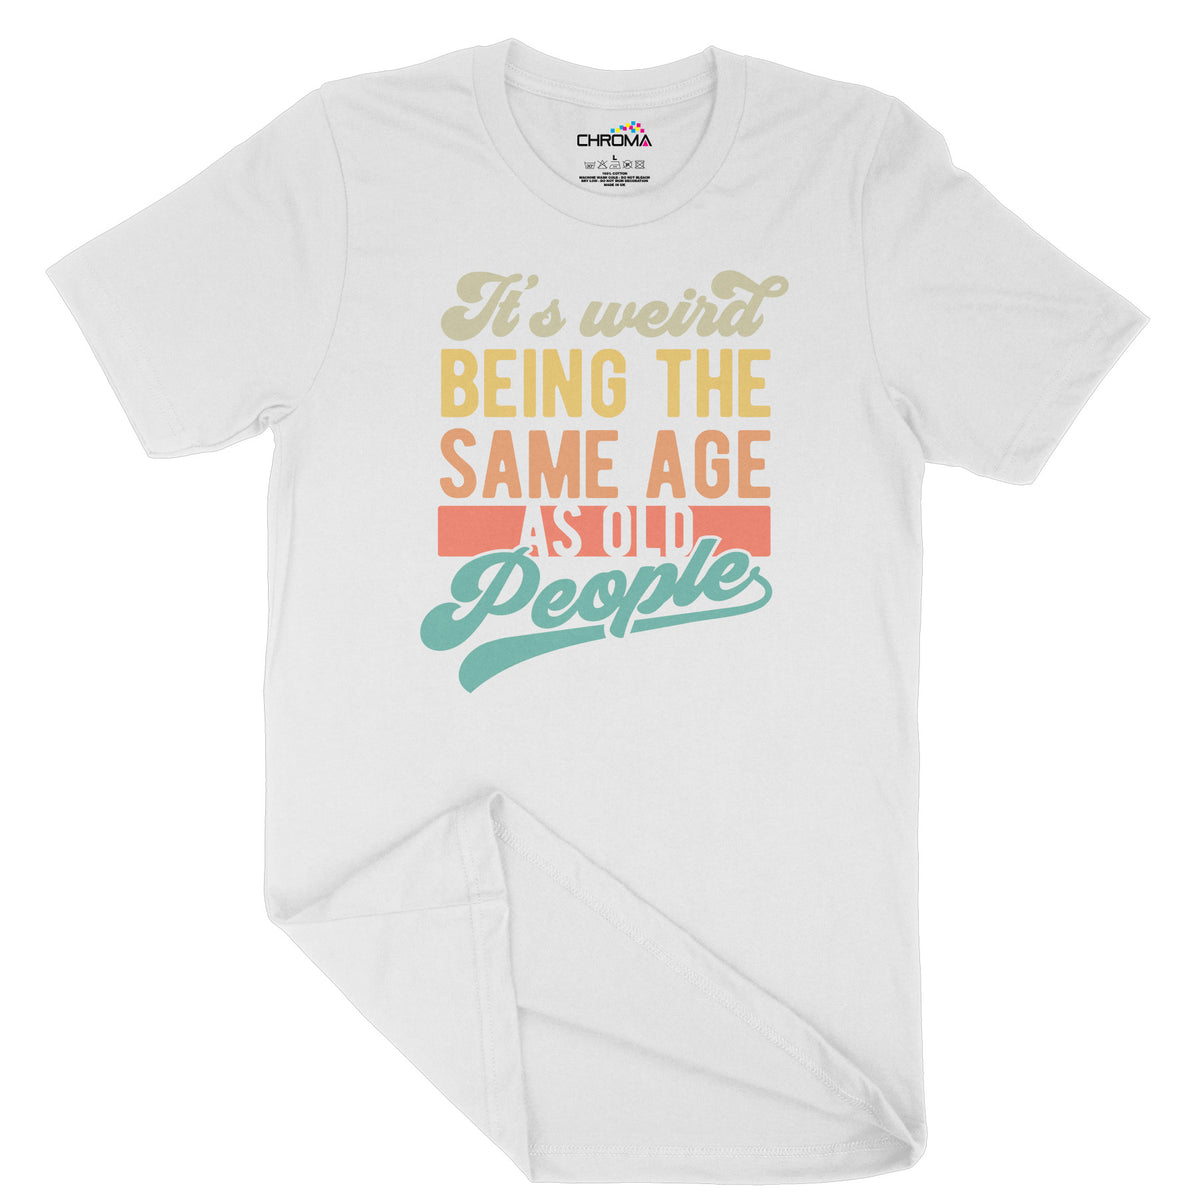 It's Weird Being The Same Age As Old People | Unisex Adult T-Shirt | Q Chroma Clothing